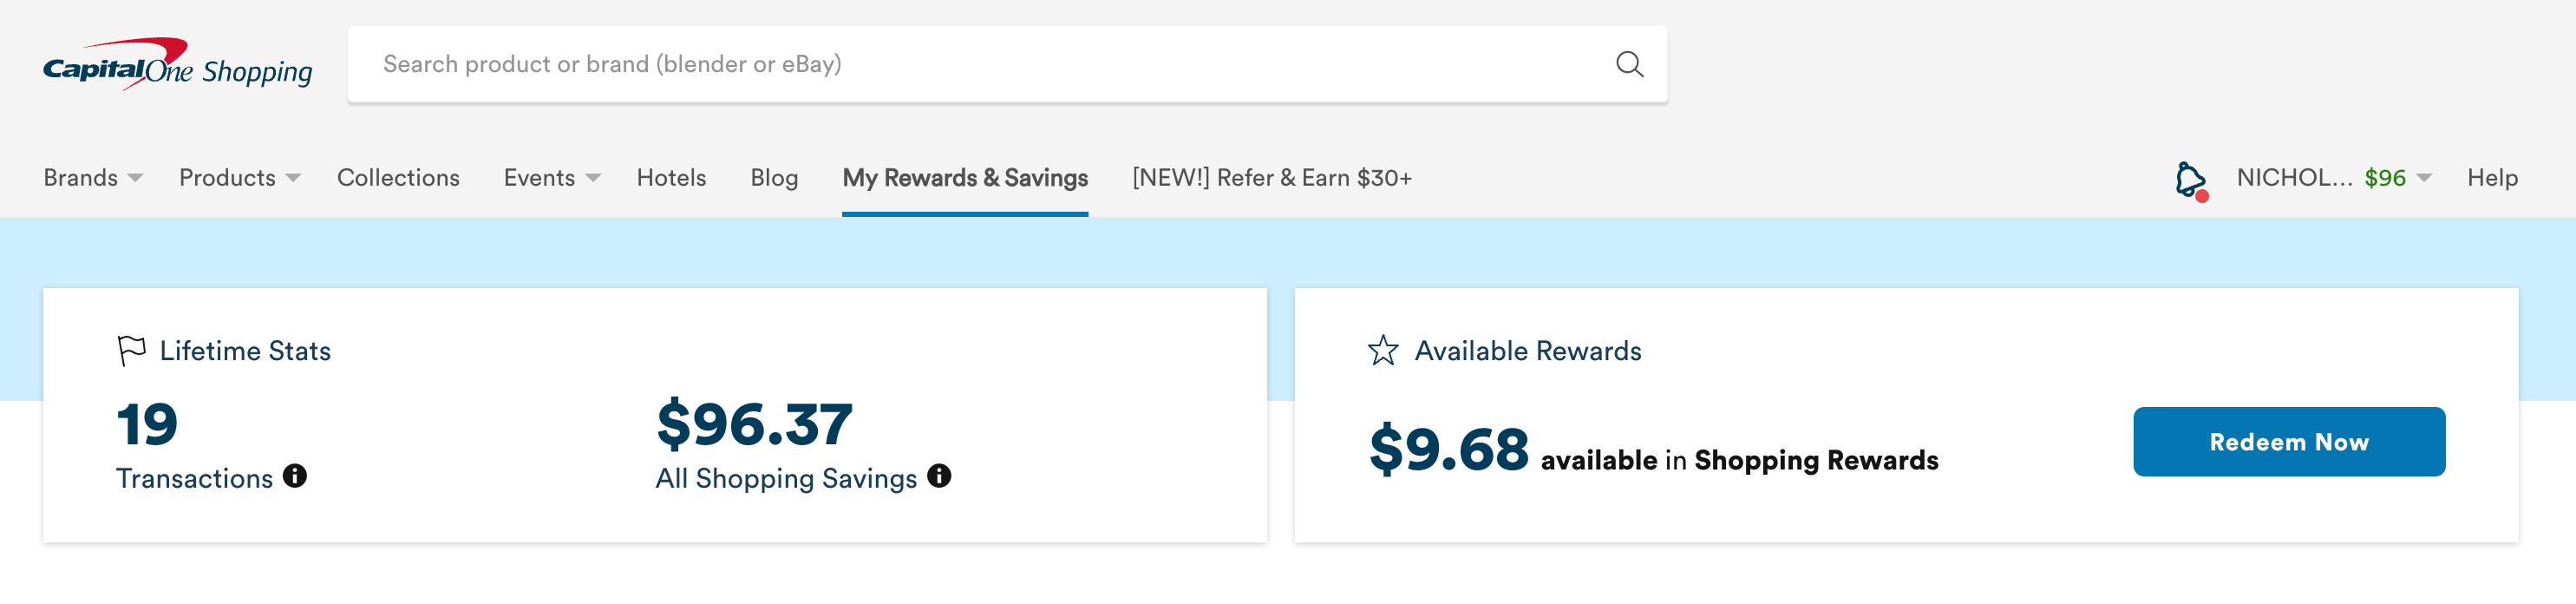 Account details on Capital One Shopping